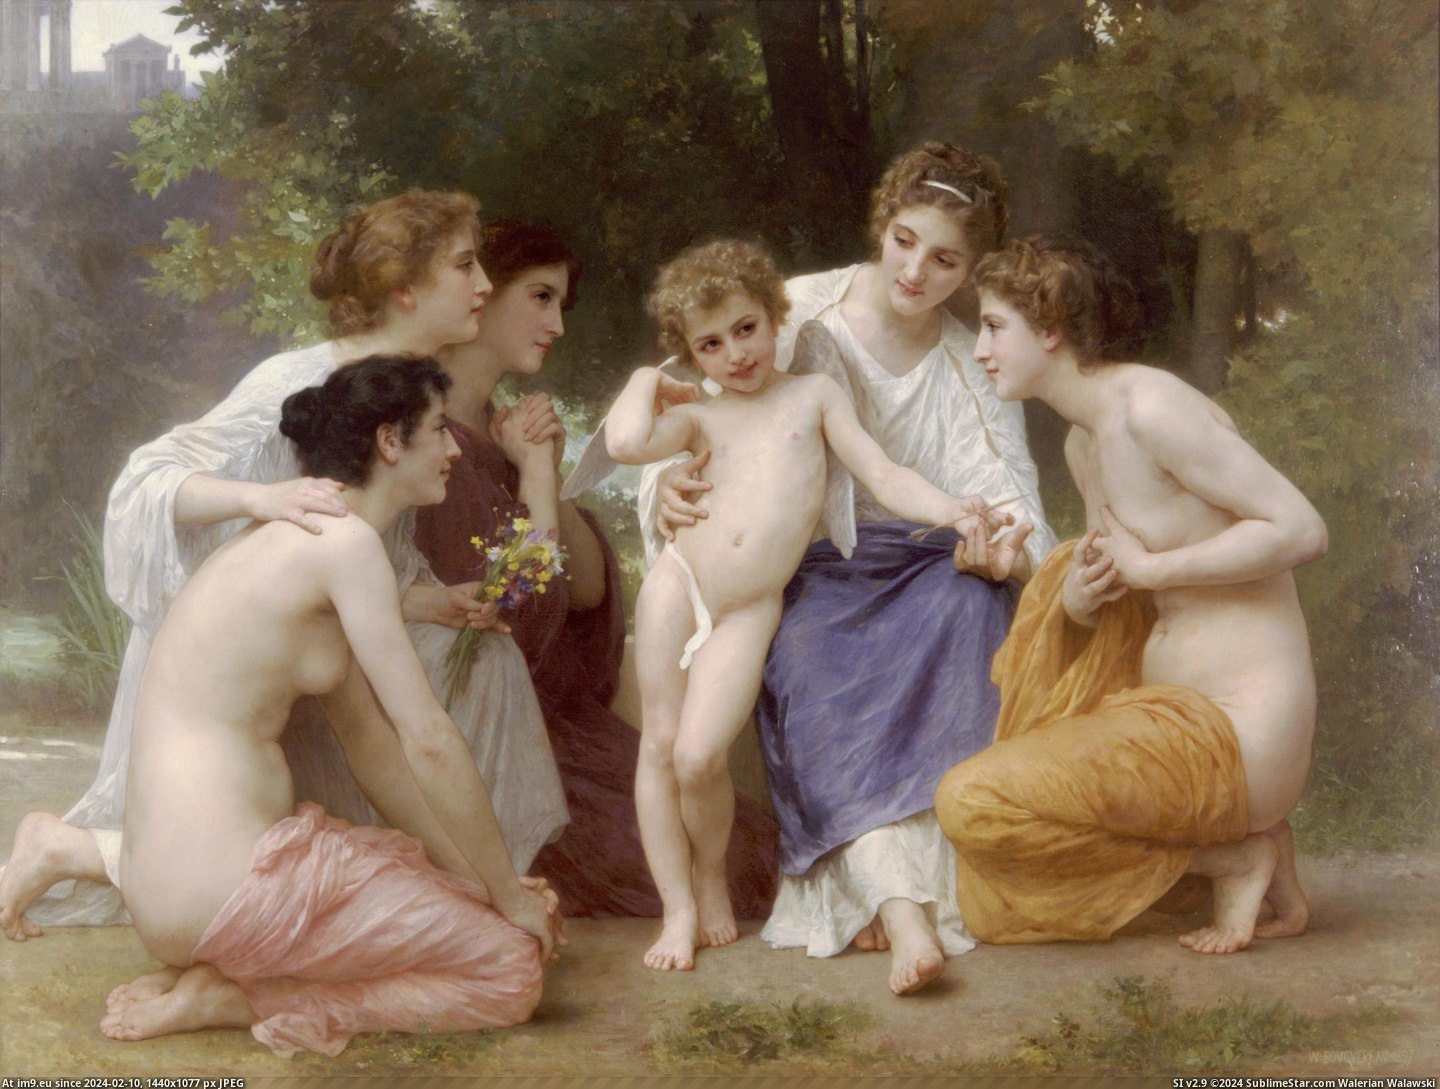 #Art #Painting #Bouguereau #Adolphe #Paintings #William (1897) Ladmiration - William Adolphe Bouguereau Pic. (Image of album William Adolphe Bouguereau paintings (1825-1905)))